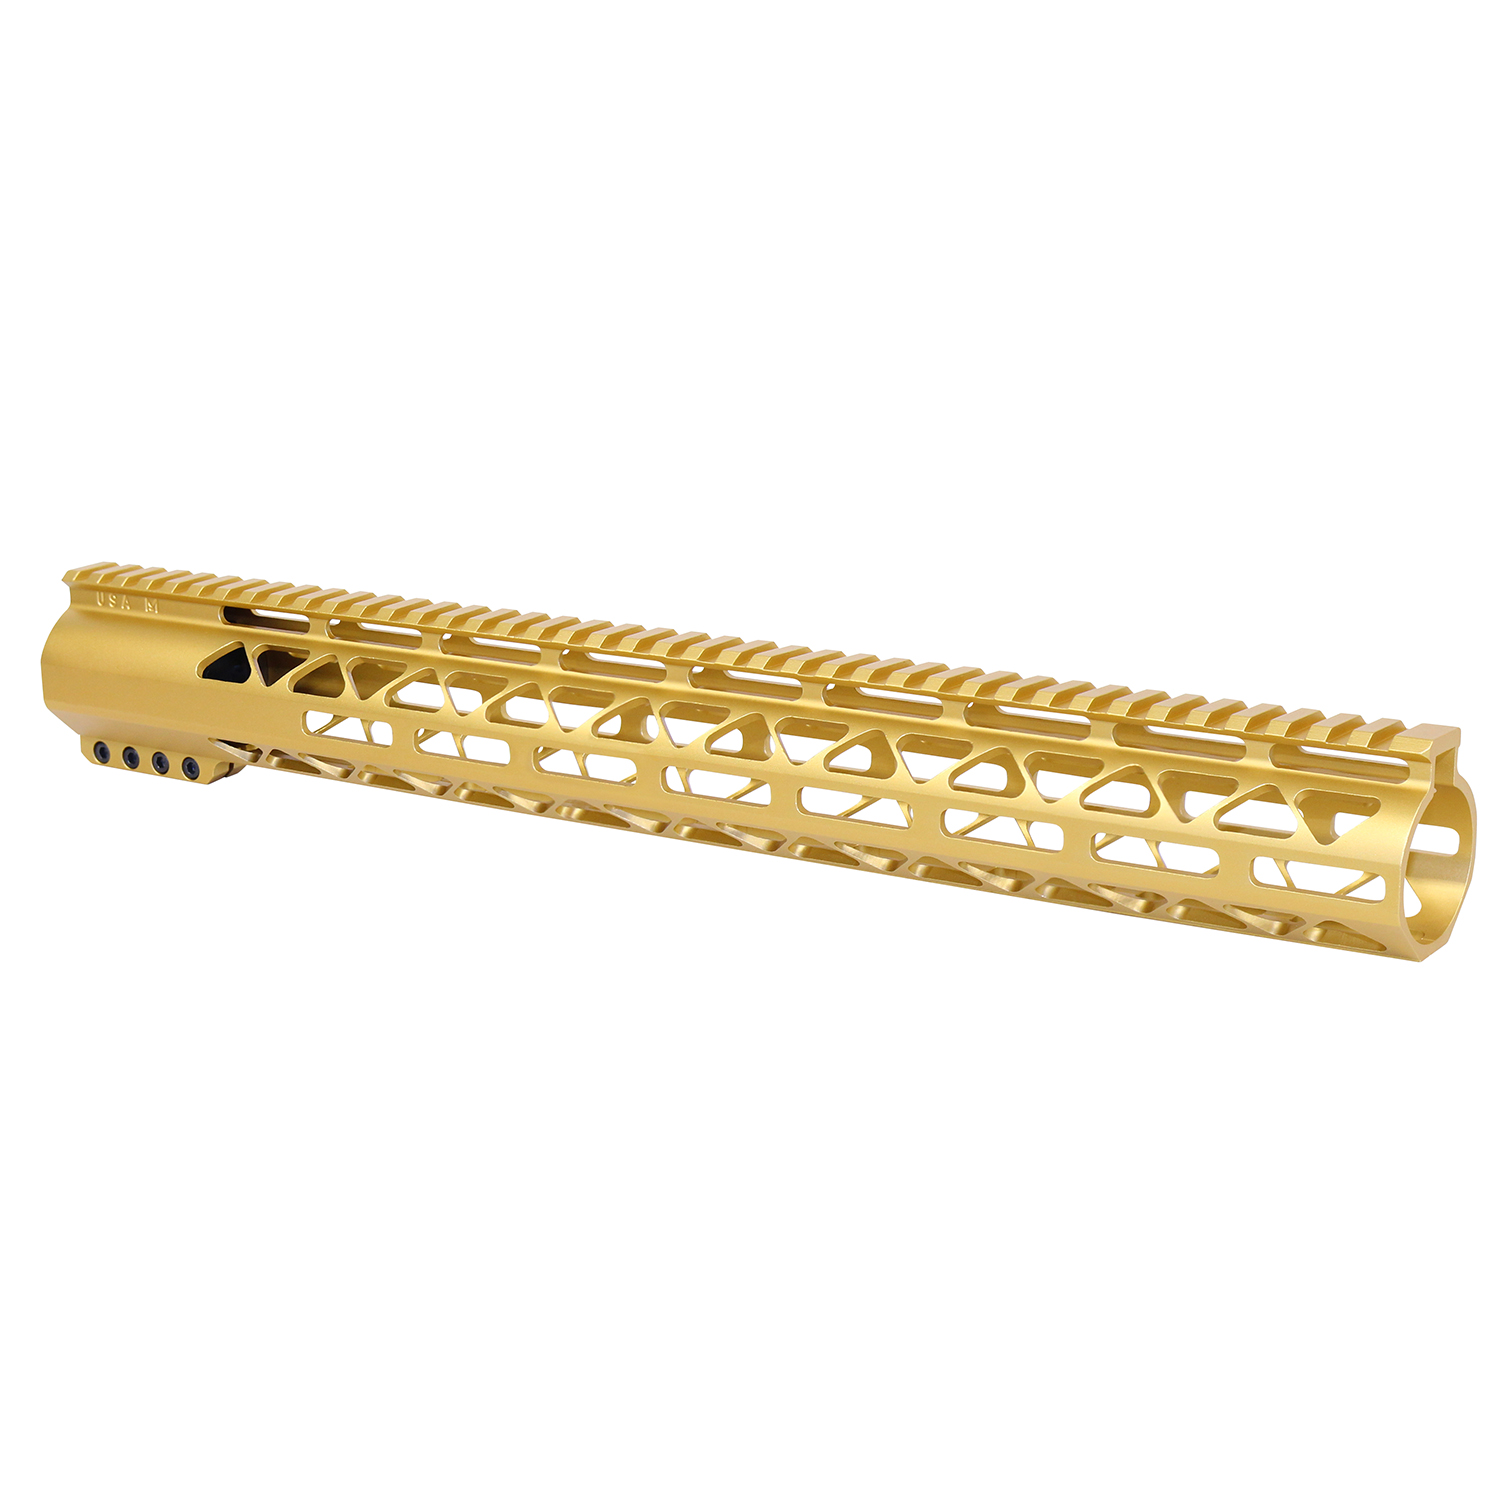 16.5" AIR-LOK Series M-LOK Compression Free Floating Handguard With Monolithic Top Rail (.308 Cal) (Anodized Gold)